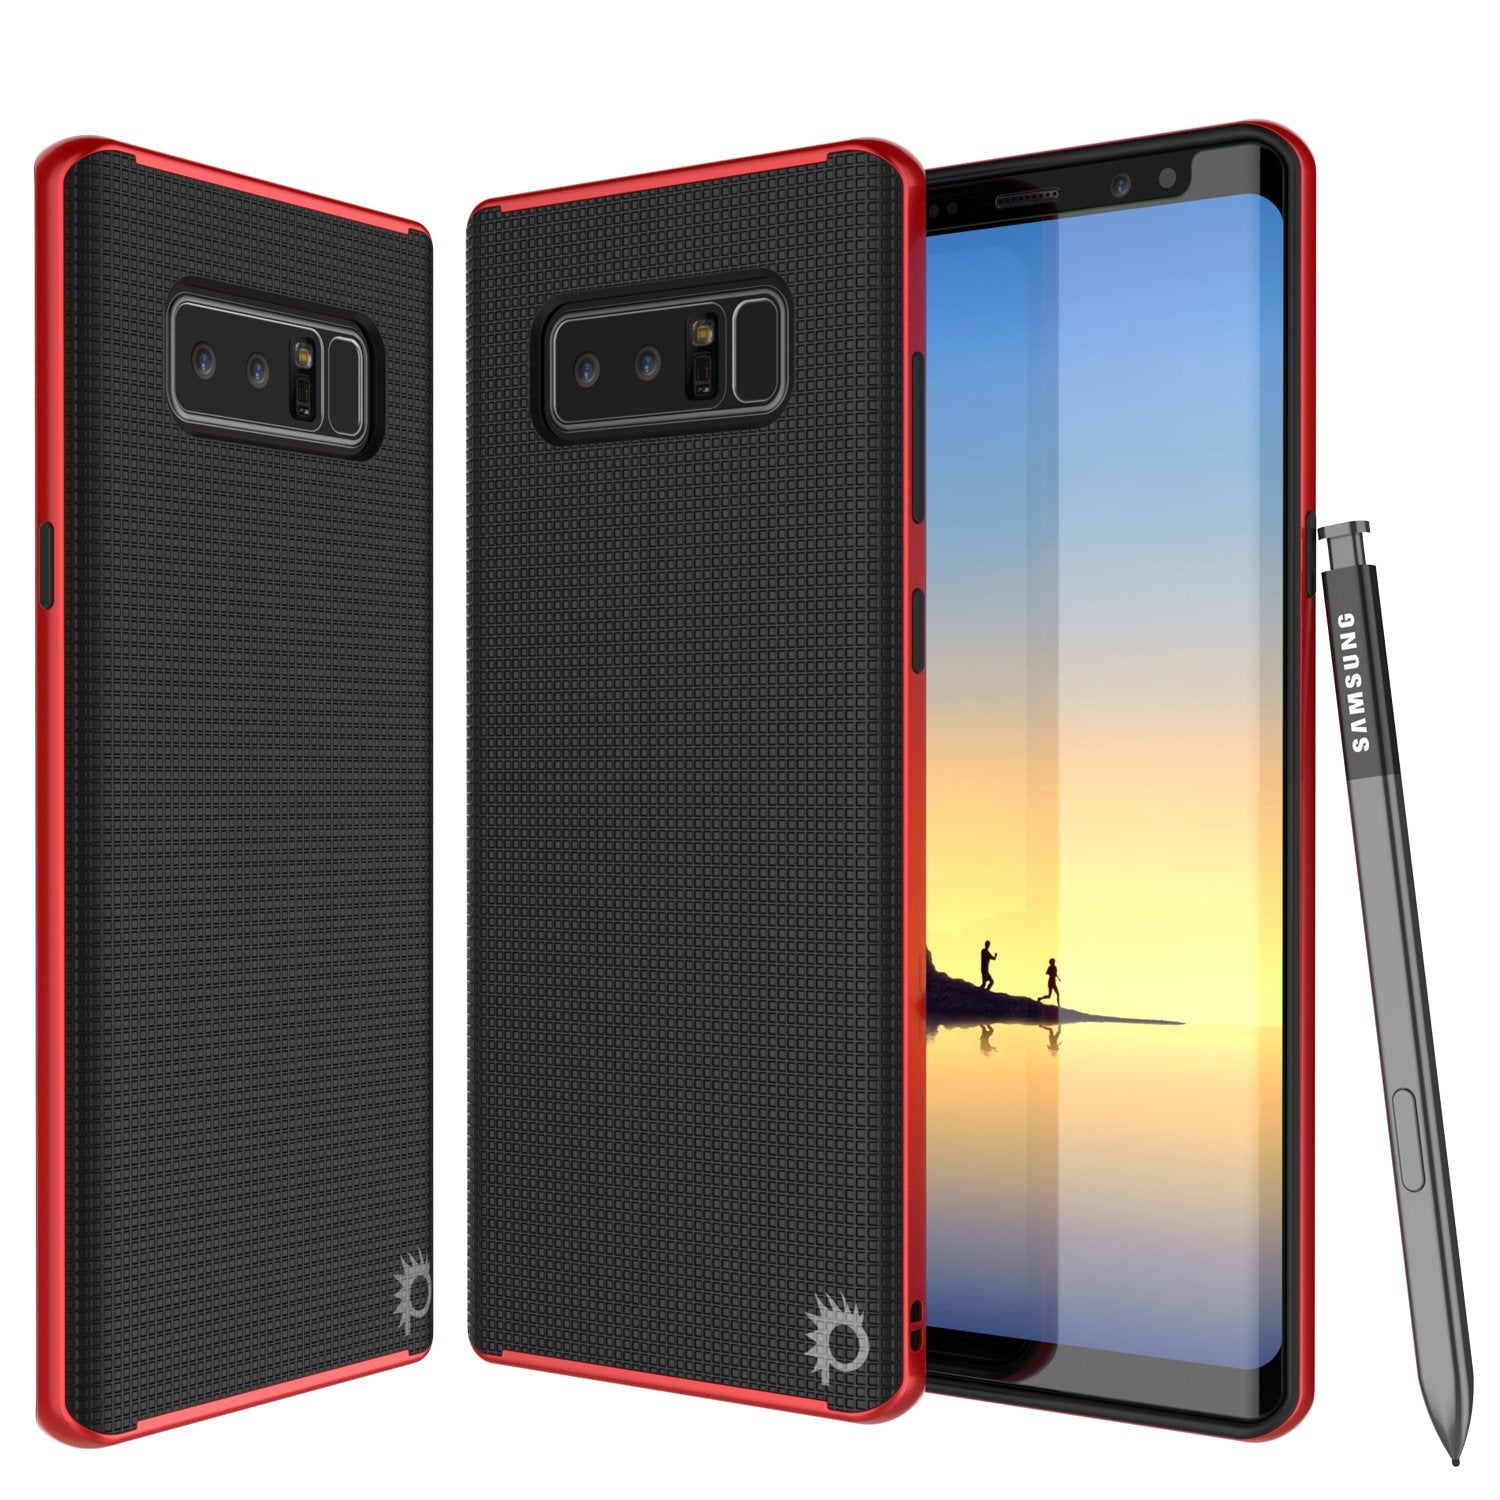 Galaxy Note 8 Case, PunkCase Stealth Red Series Hybrid 3-Piece Shockproof Dual Layer Cover